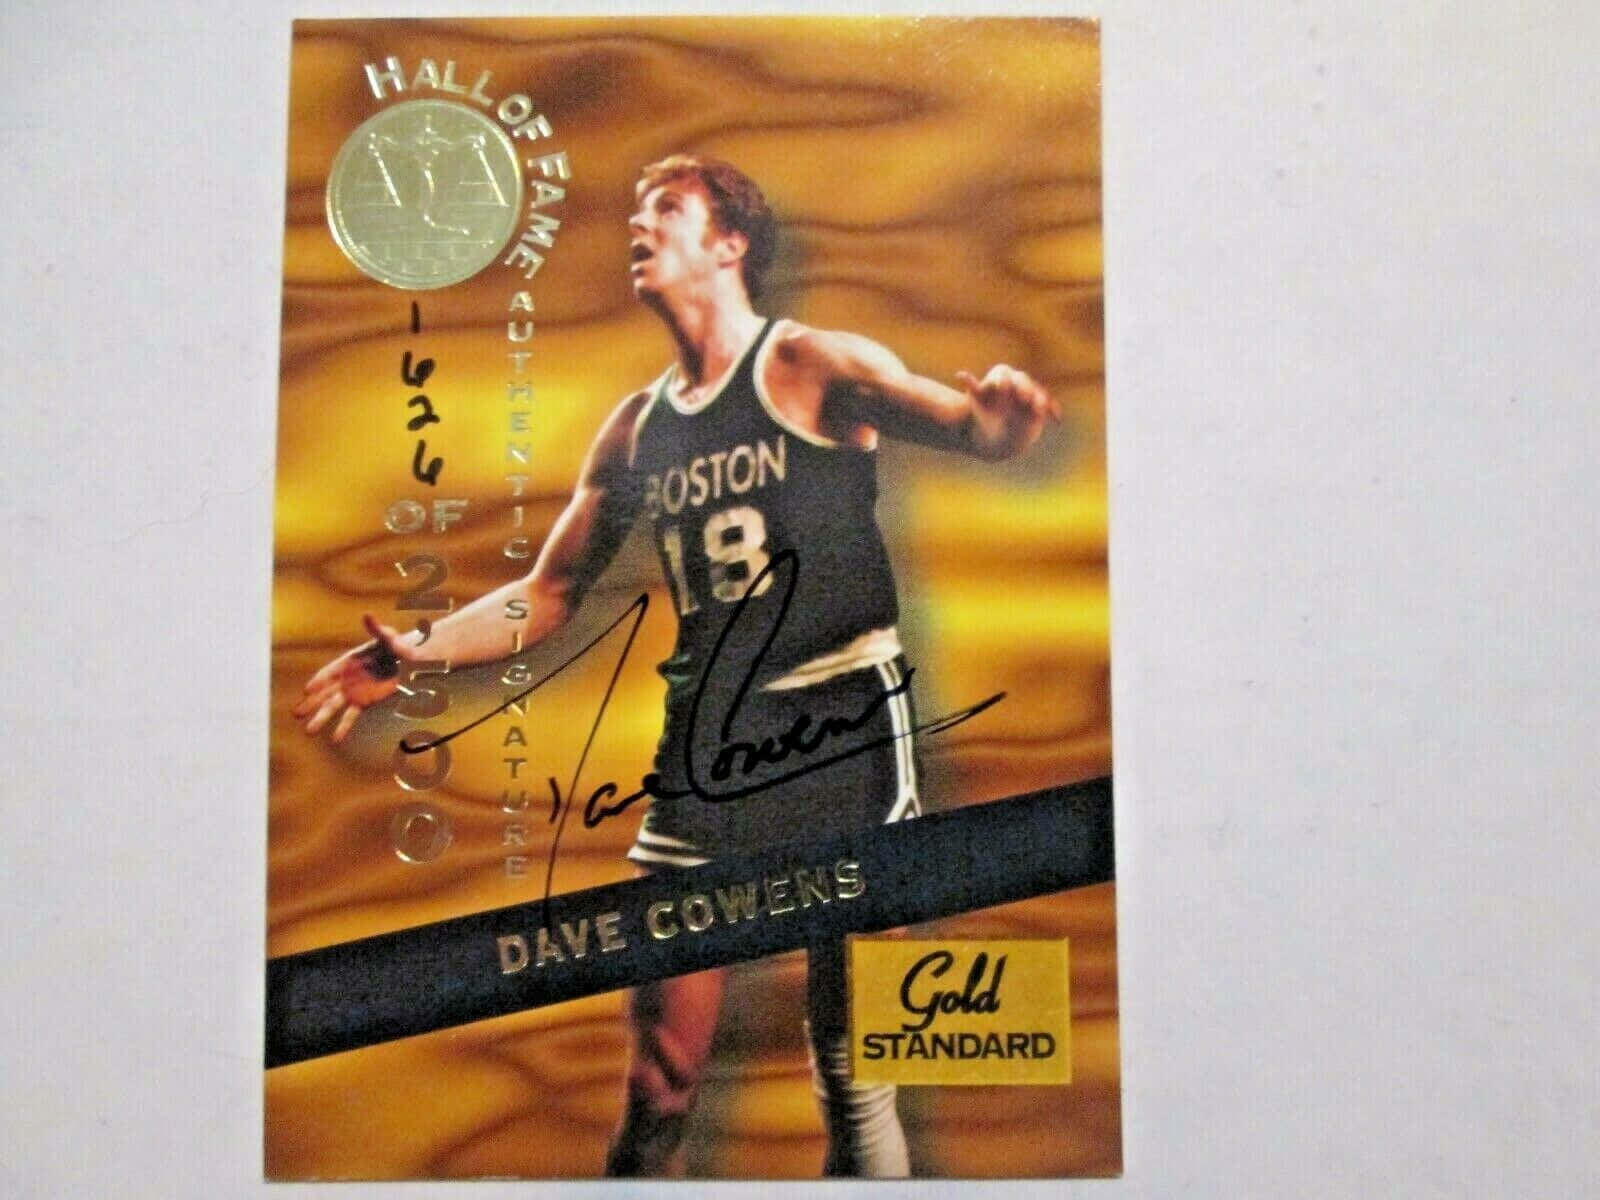 Dave Cowens Signed Collectible Wallpaper